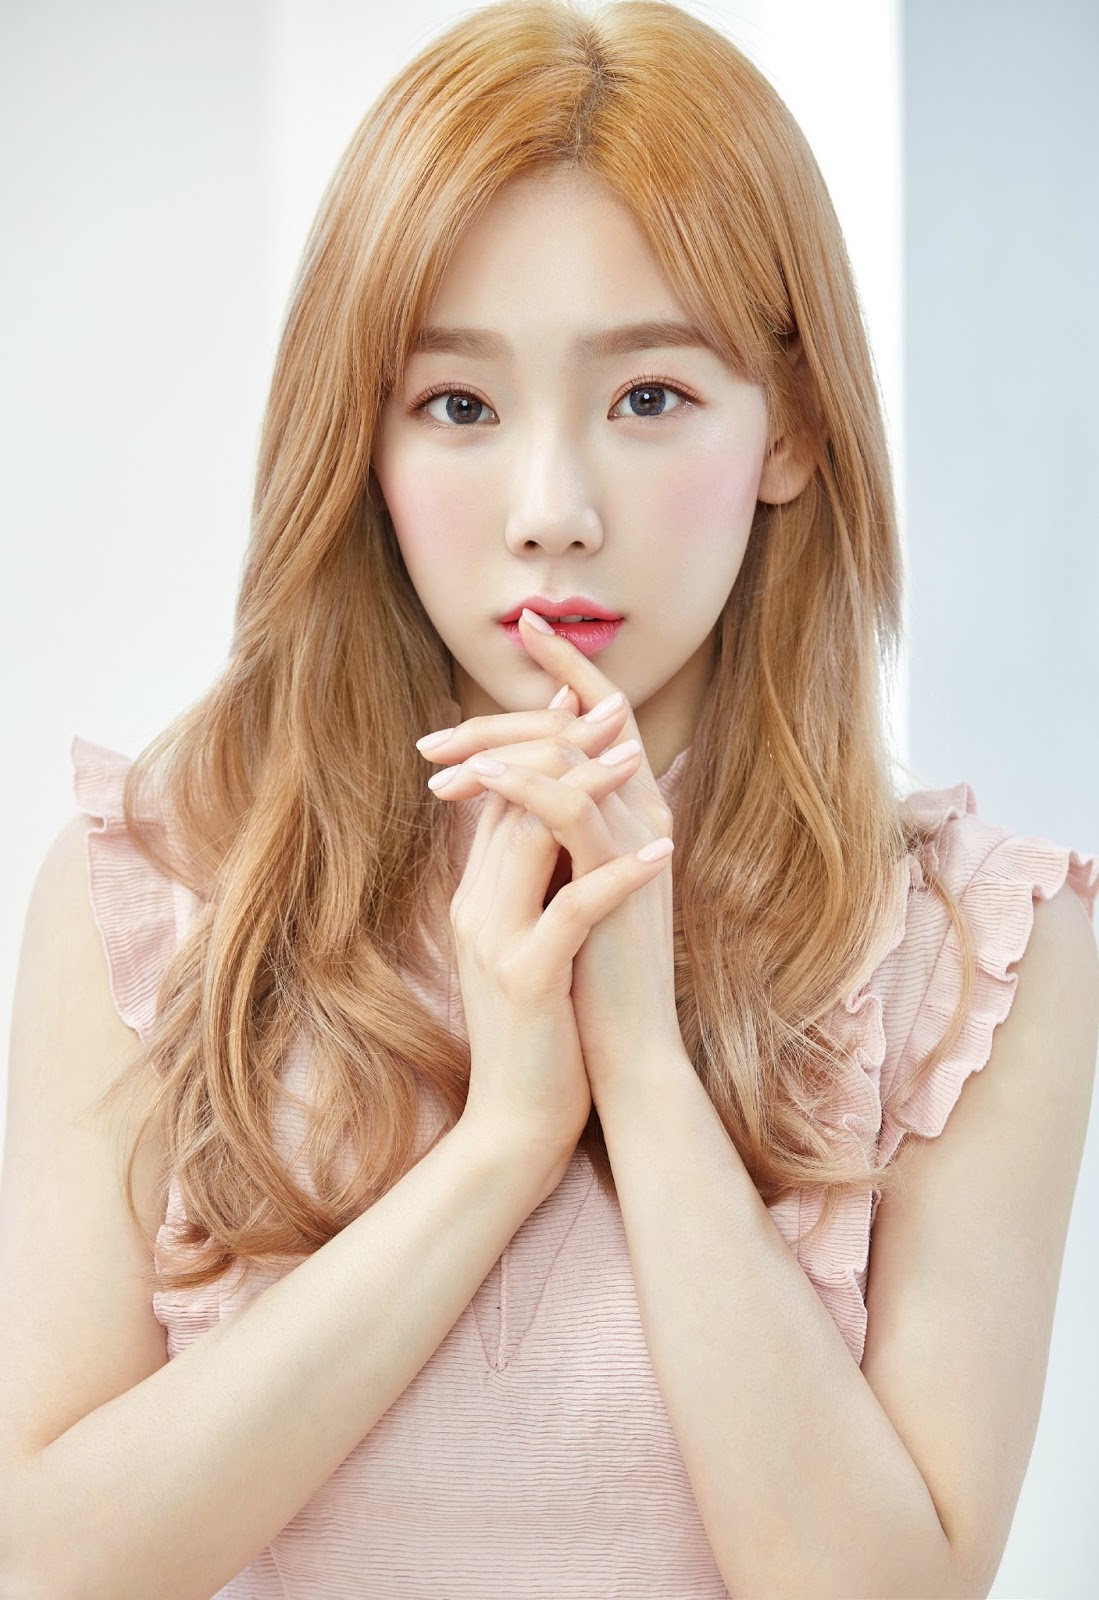 More Of Snsd Taeyeon S Charming Pictures From Banila Co 미용 제품 소녀시대 머리 스타일